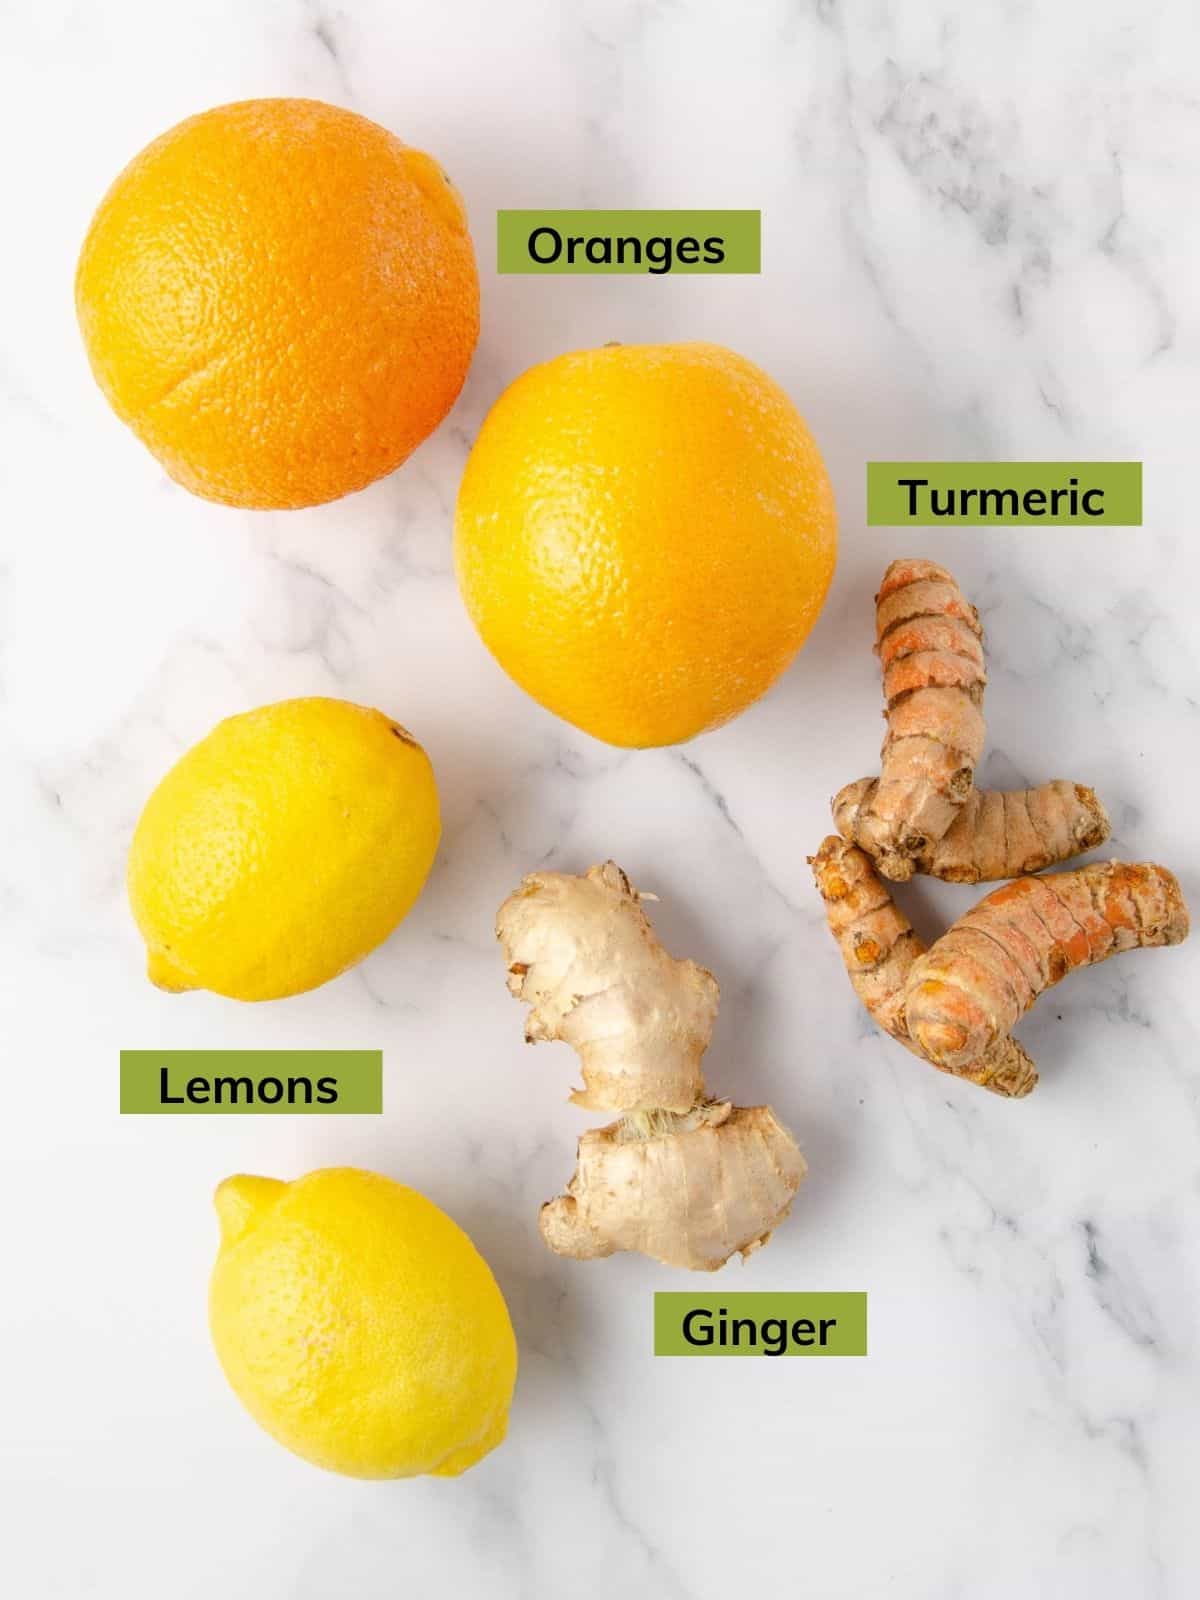 ingredients for a turmeric shot: two oranges, two lemons, two pieces of ginger and two pieces of turmeric.